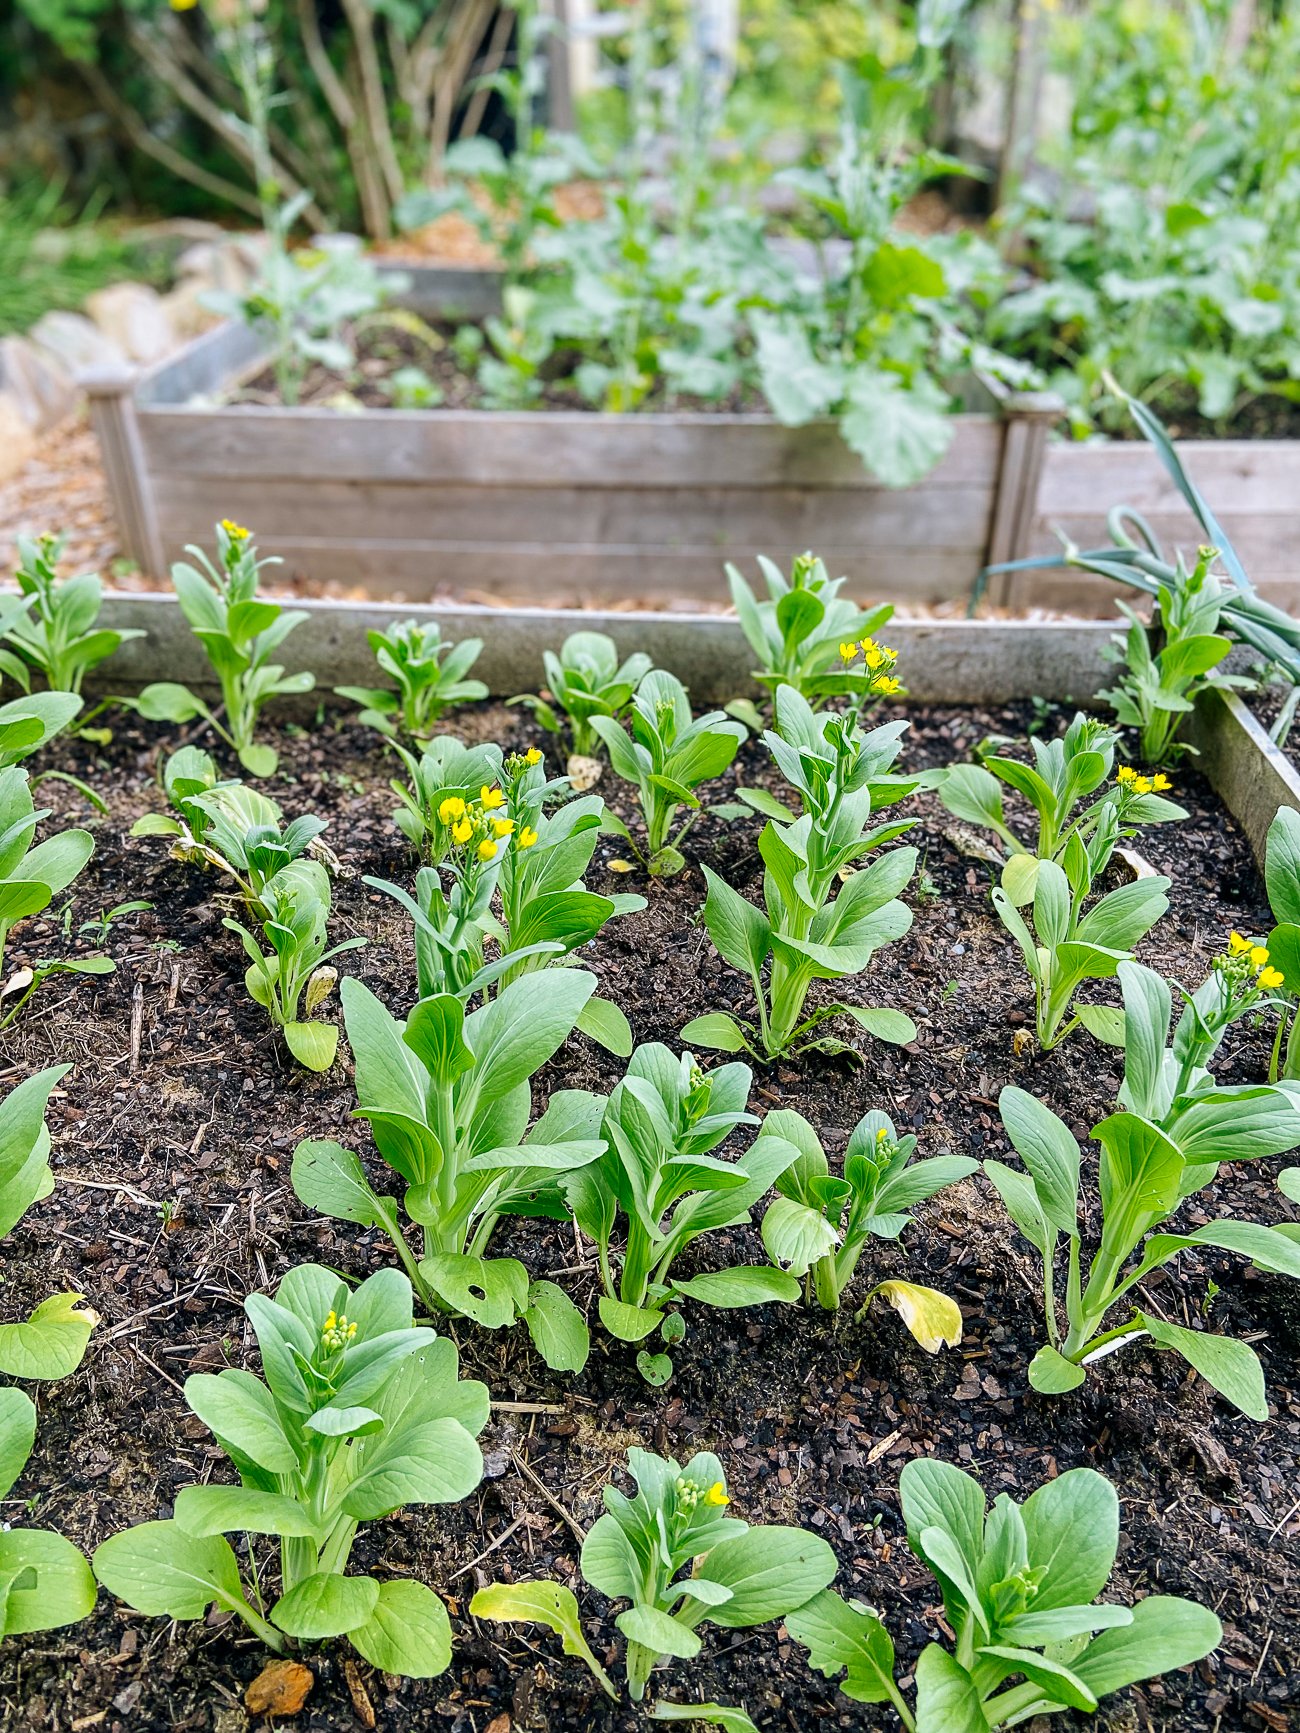 The Joy of Growing Your Own Bok Choy in Your Backyard Garden